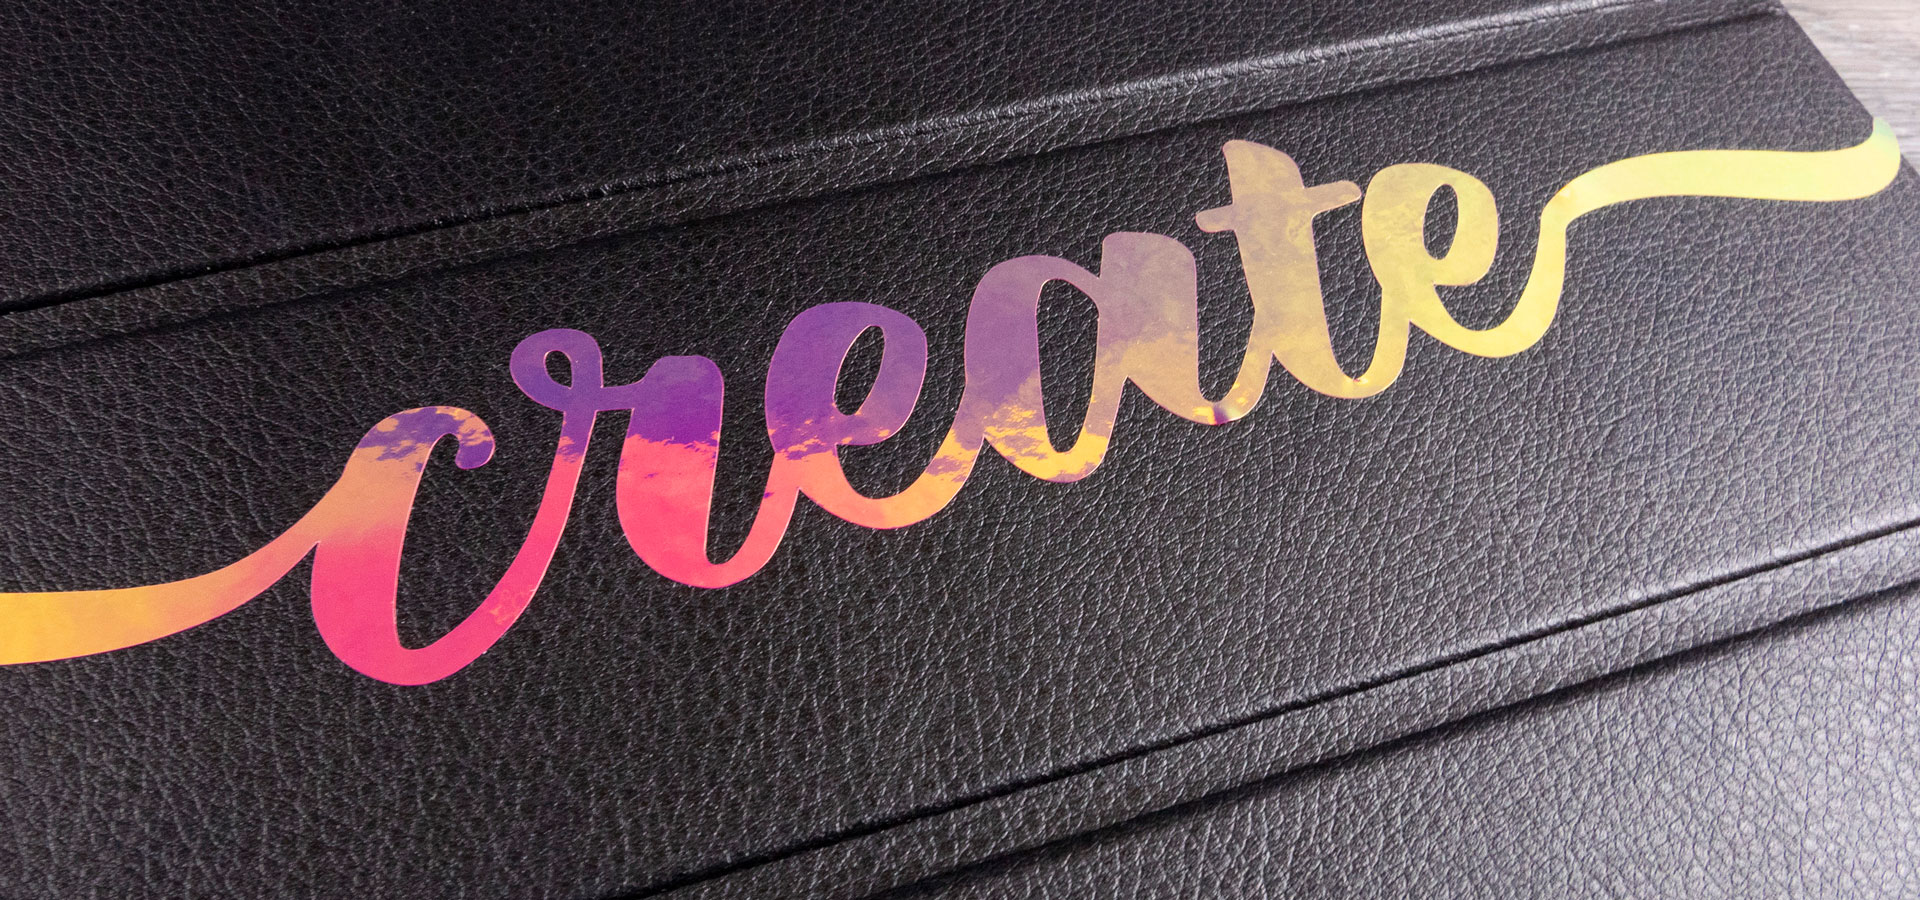 A tablet case that reads "Create" made with Pink Chameleon